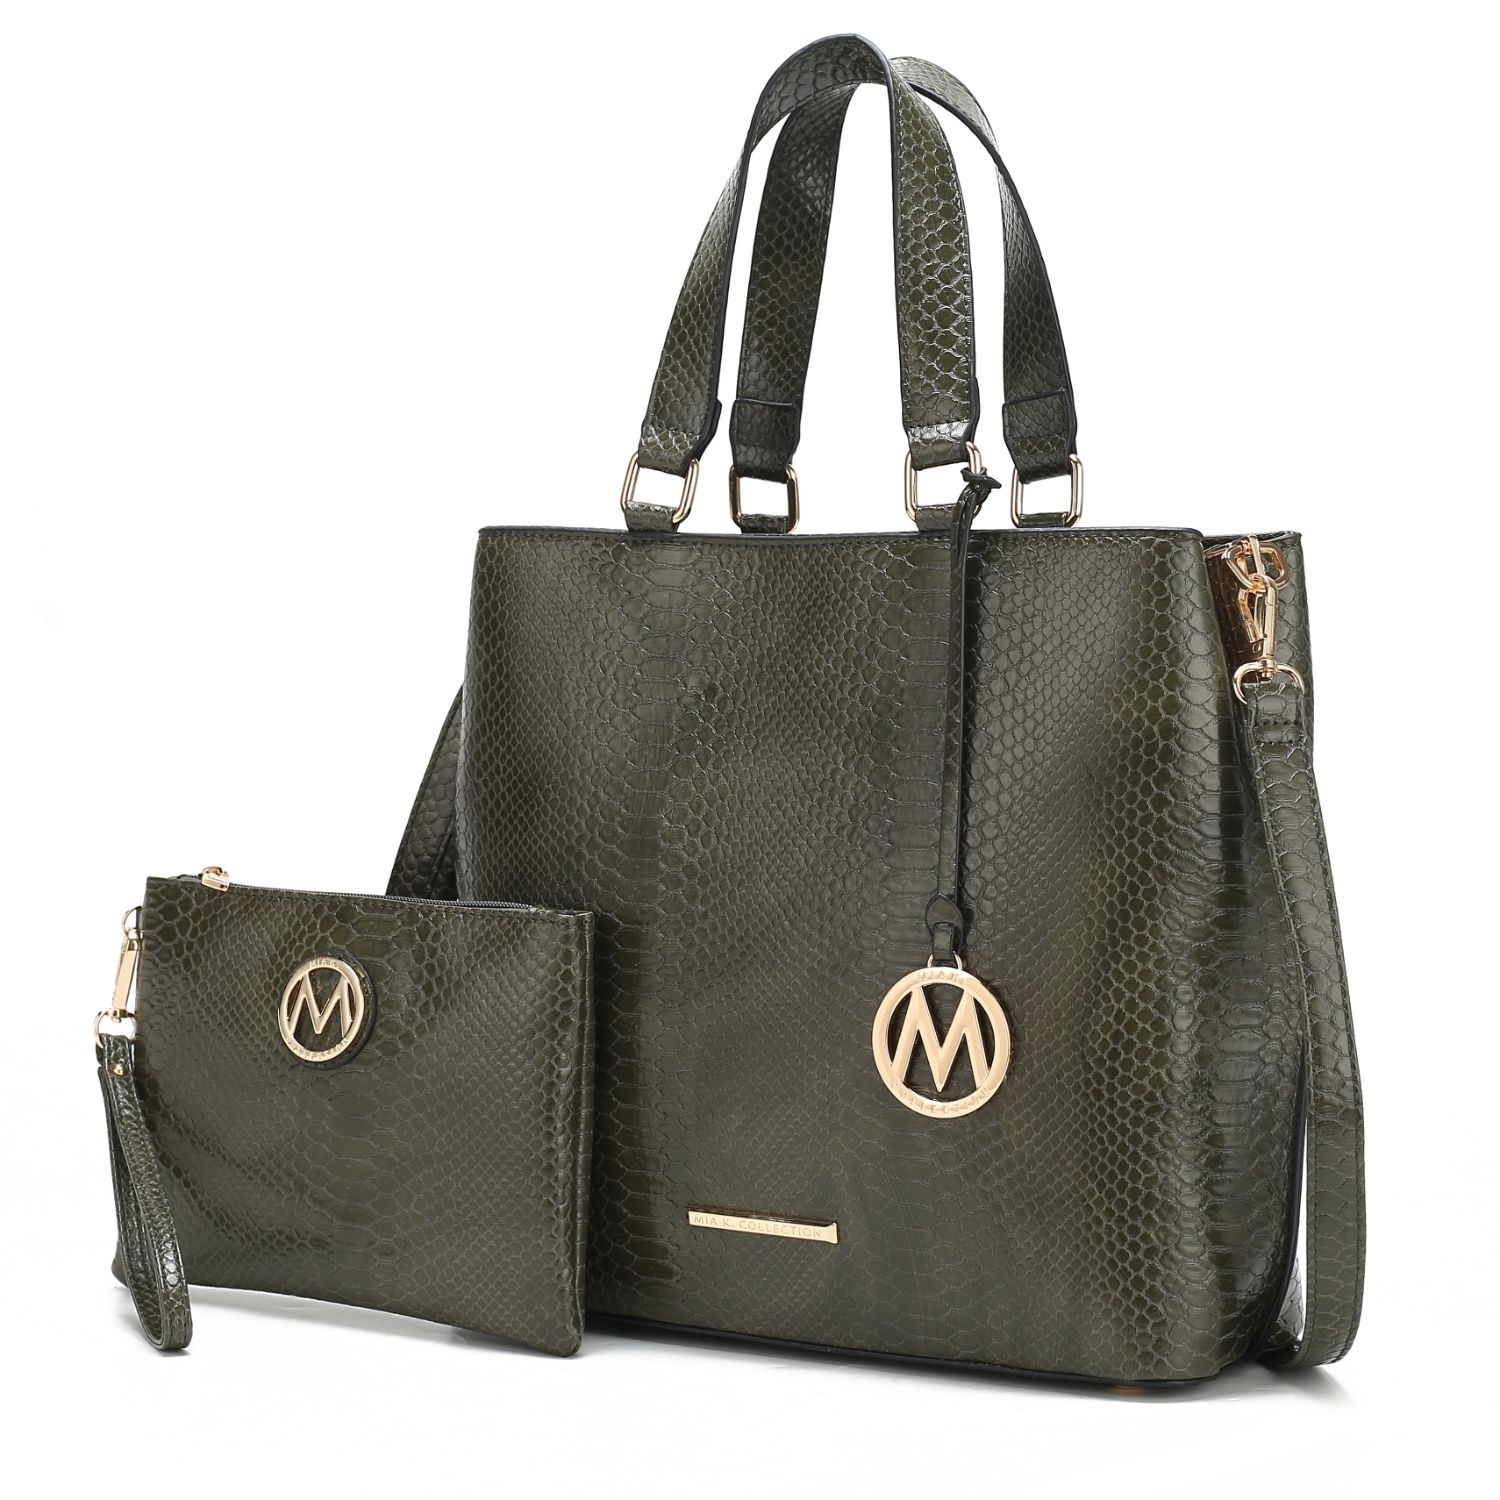 MKF Collection Beryl Snake-embossed Vegan Leather Women's Tote Handbag With Wristlet - 2 Pieces, By Mia K - Olive